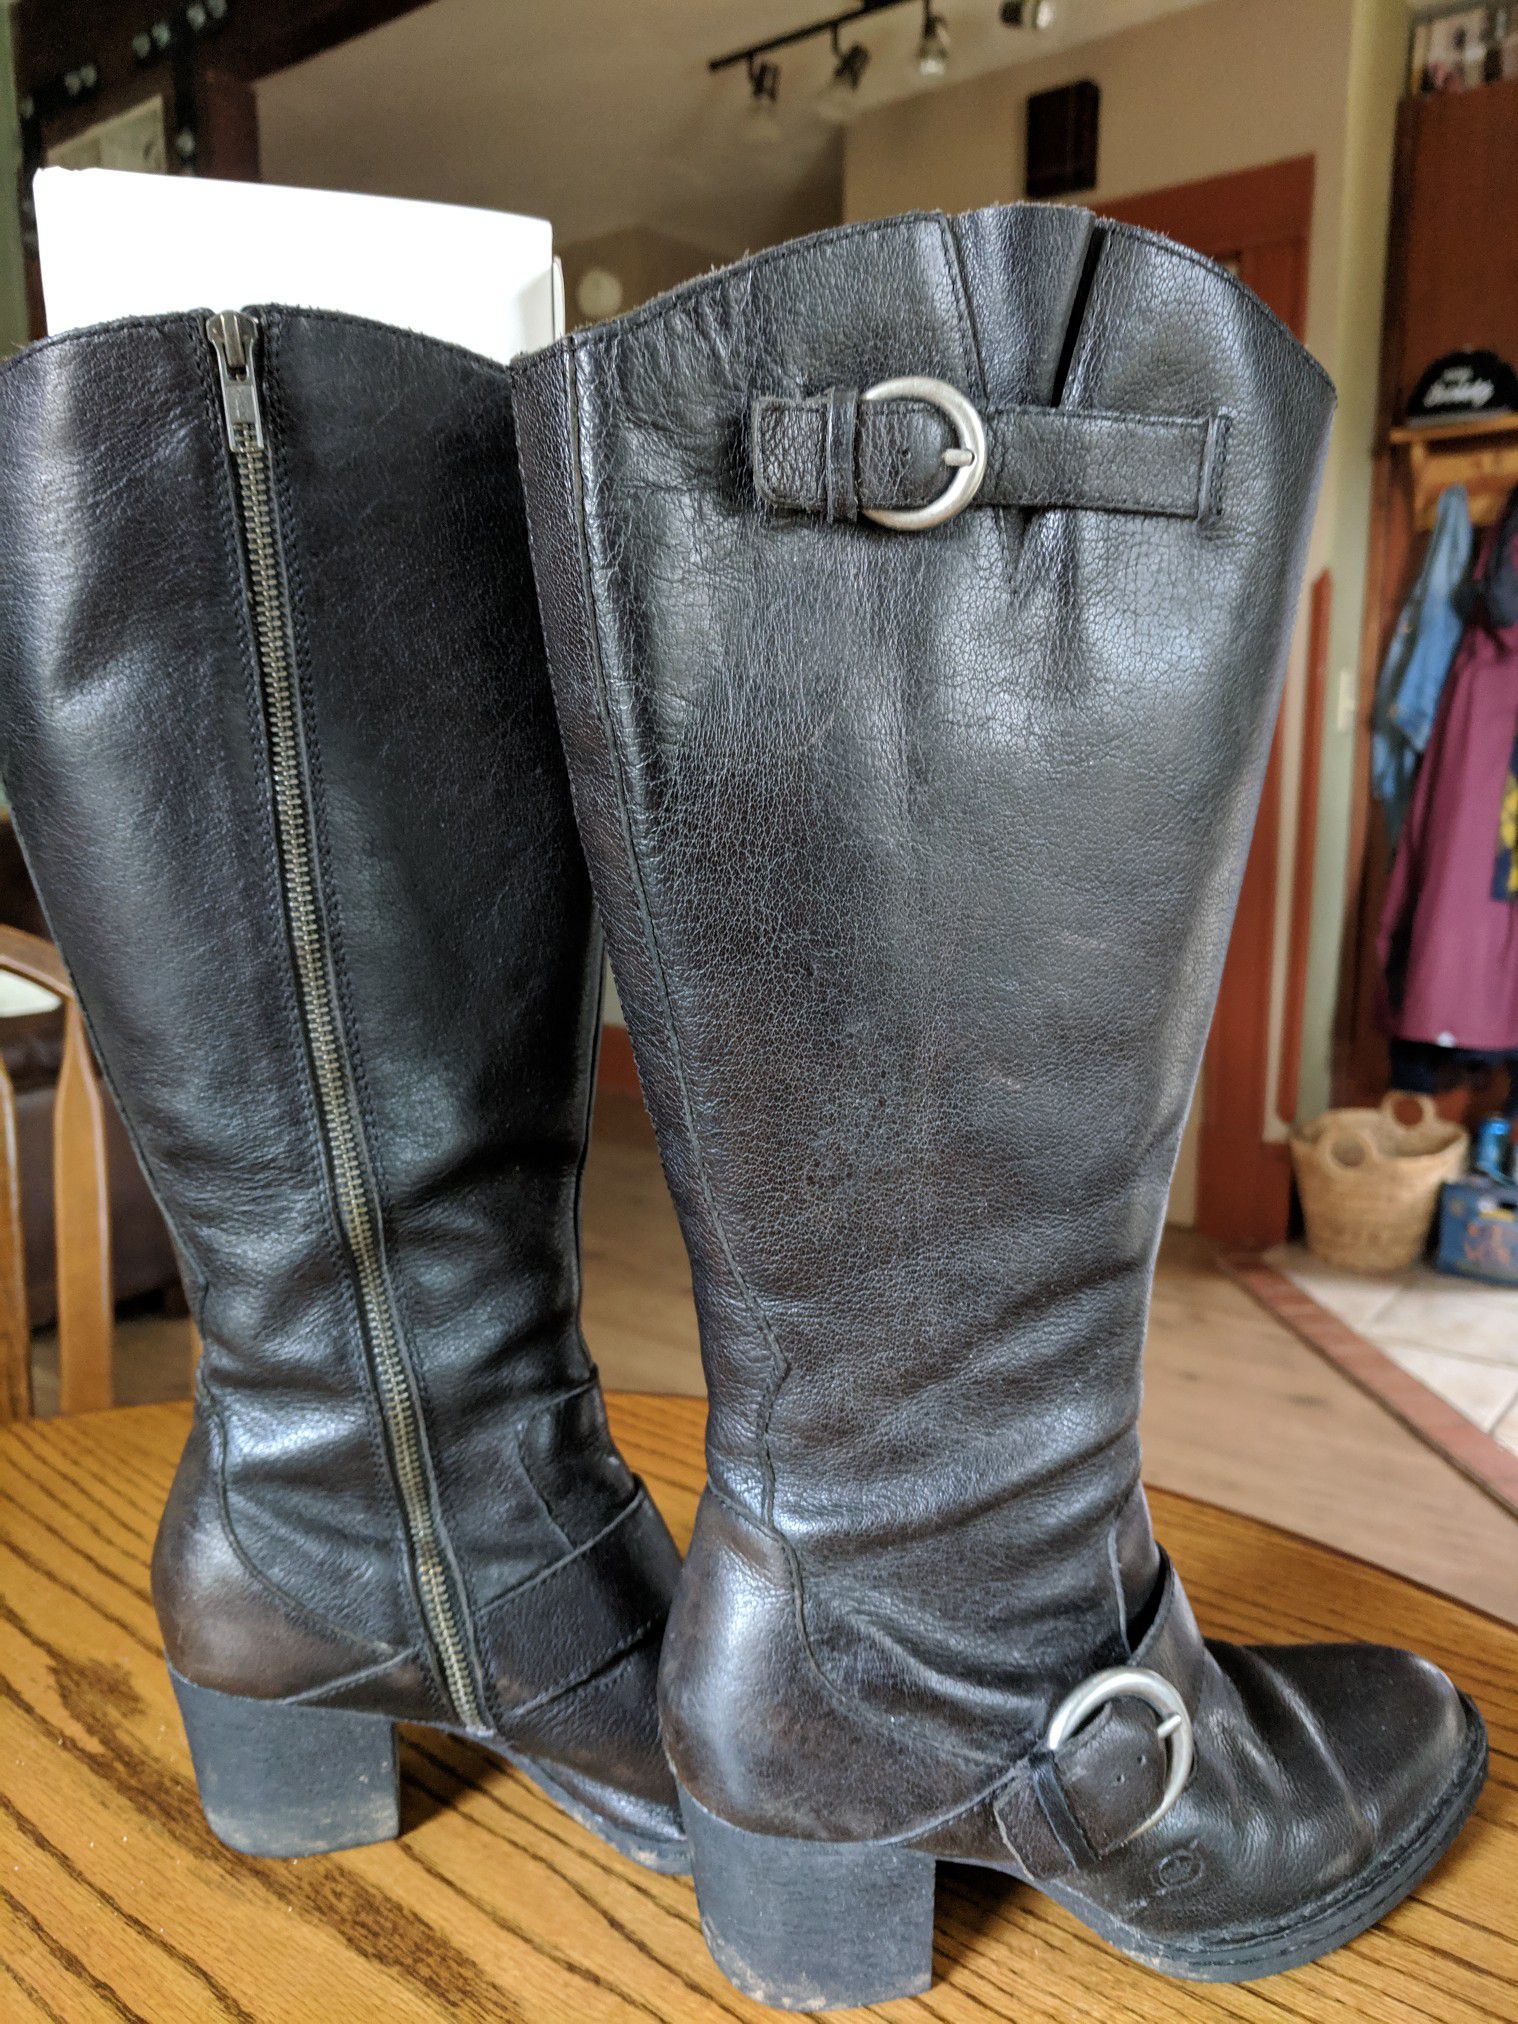 Women's Leather Boots. Born Shaylee (D08803) Size 38 European (7.5 - 8 US W)